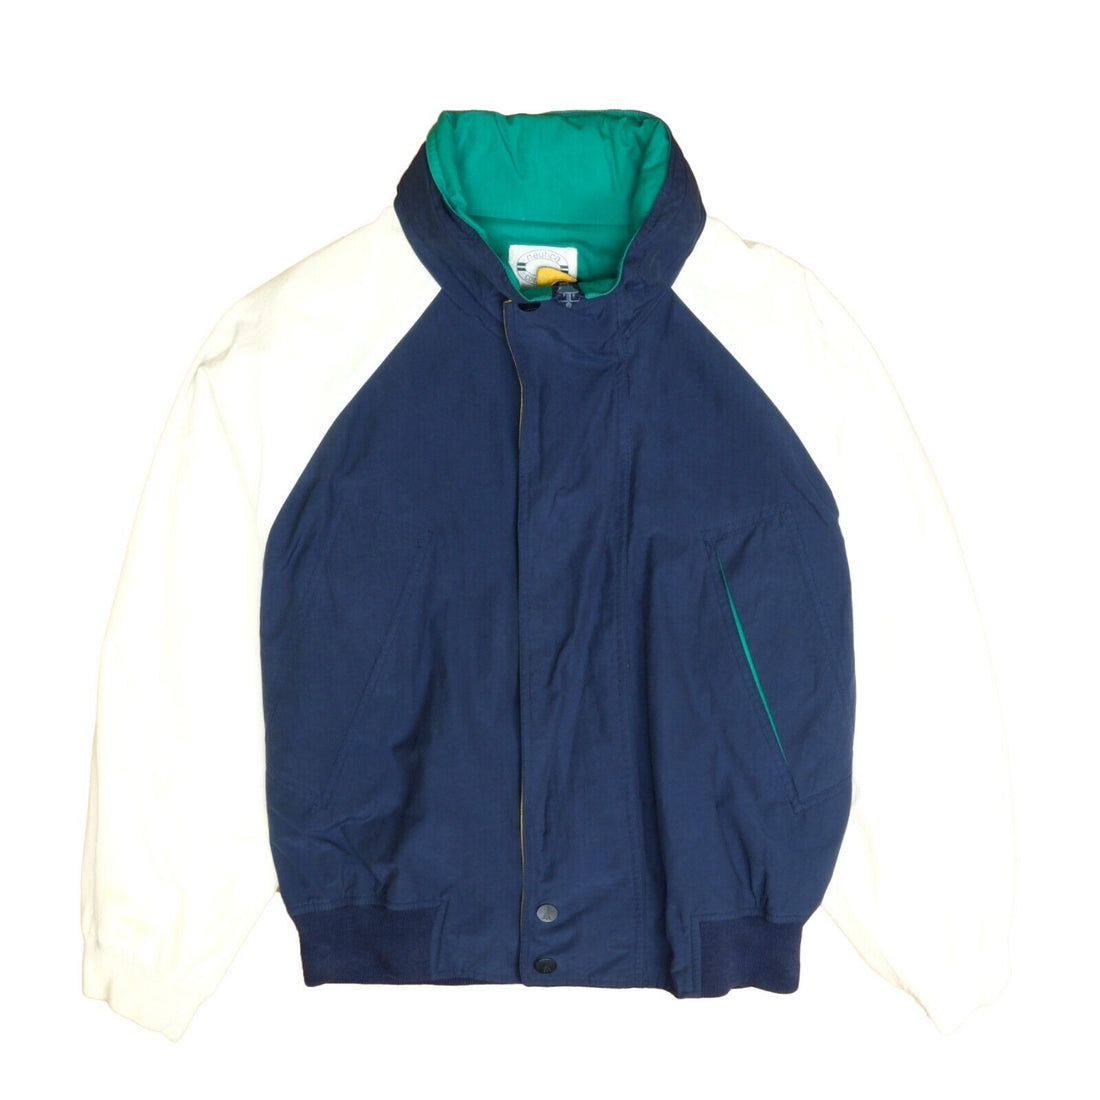 90s Nautica Jacket Built In Hood Spell out Jacket - BIDSTITCH